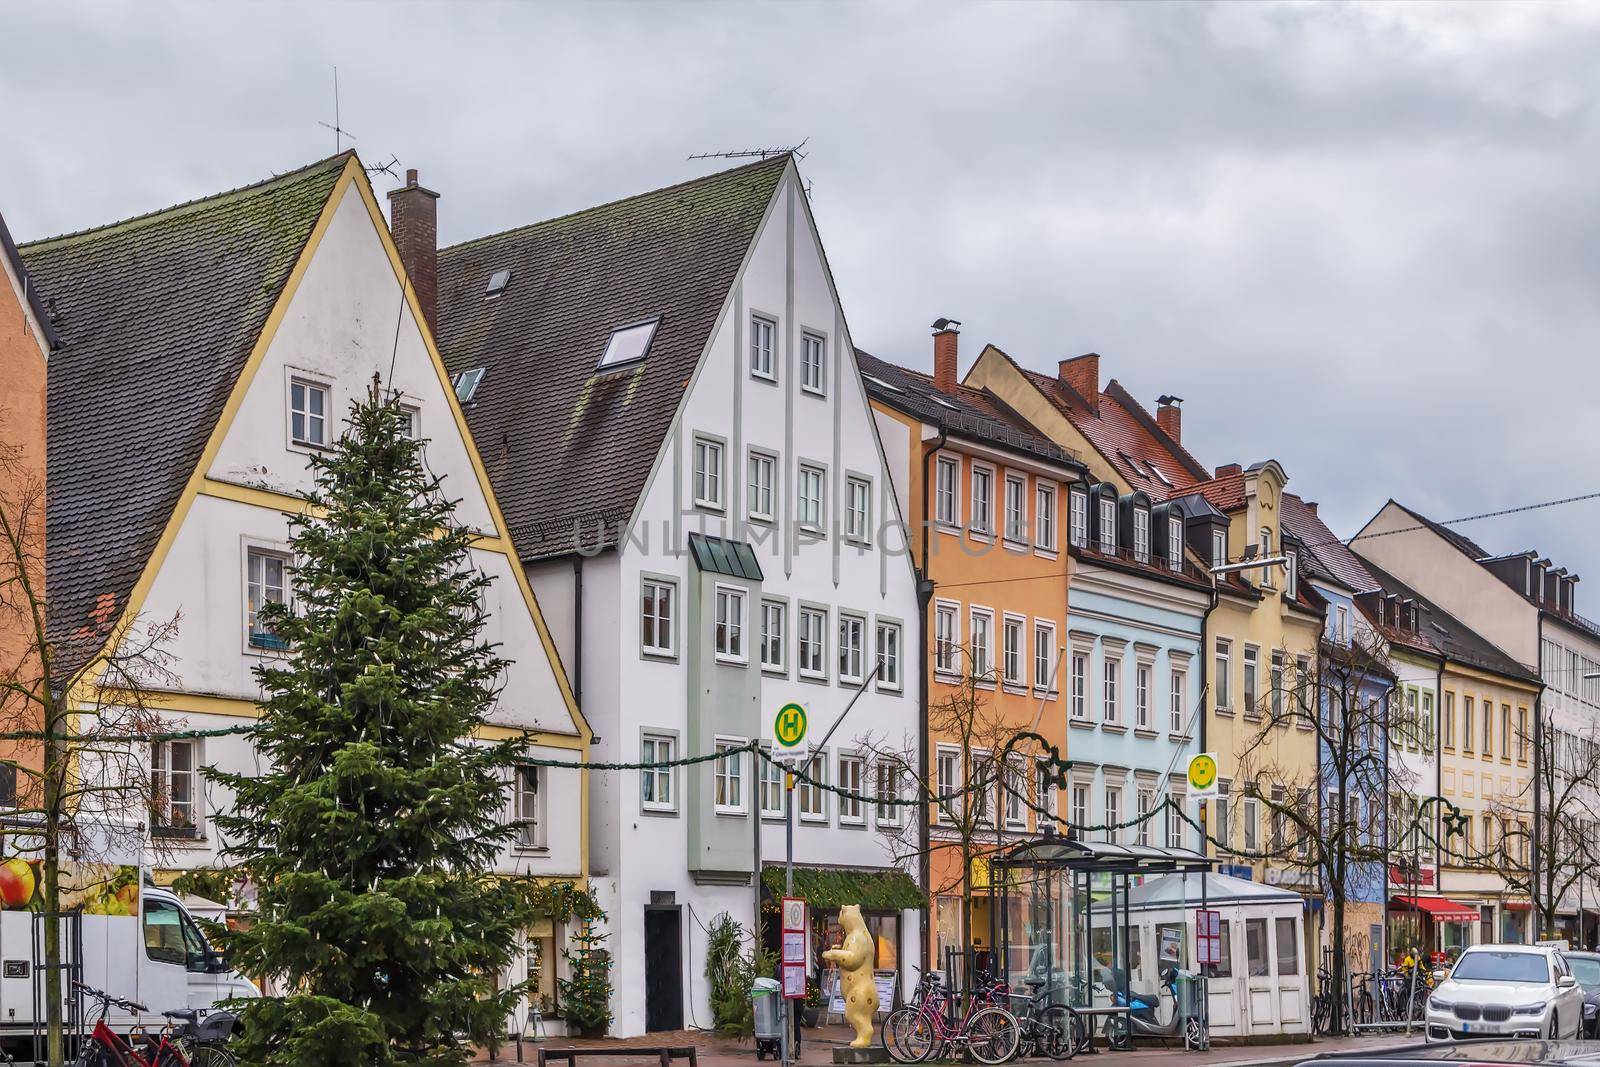 Street with historical houses in Freising city center, Germany